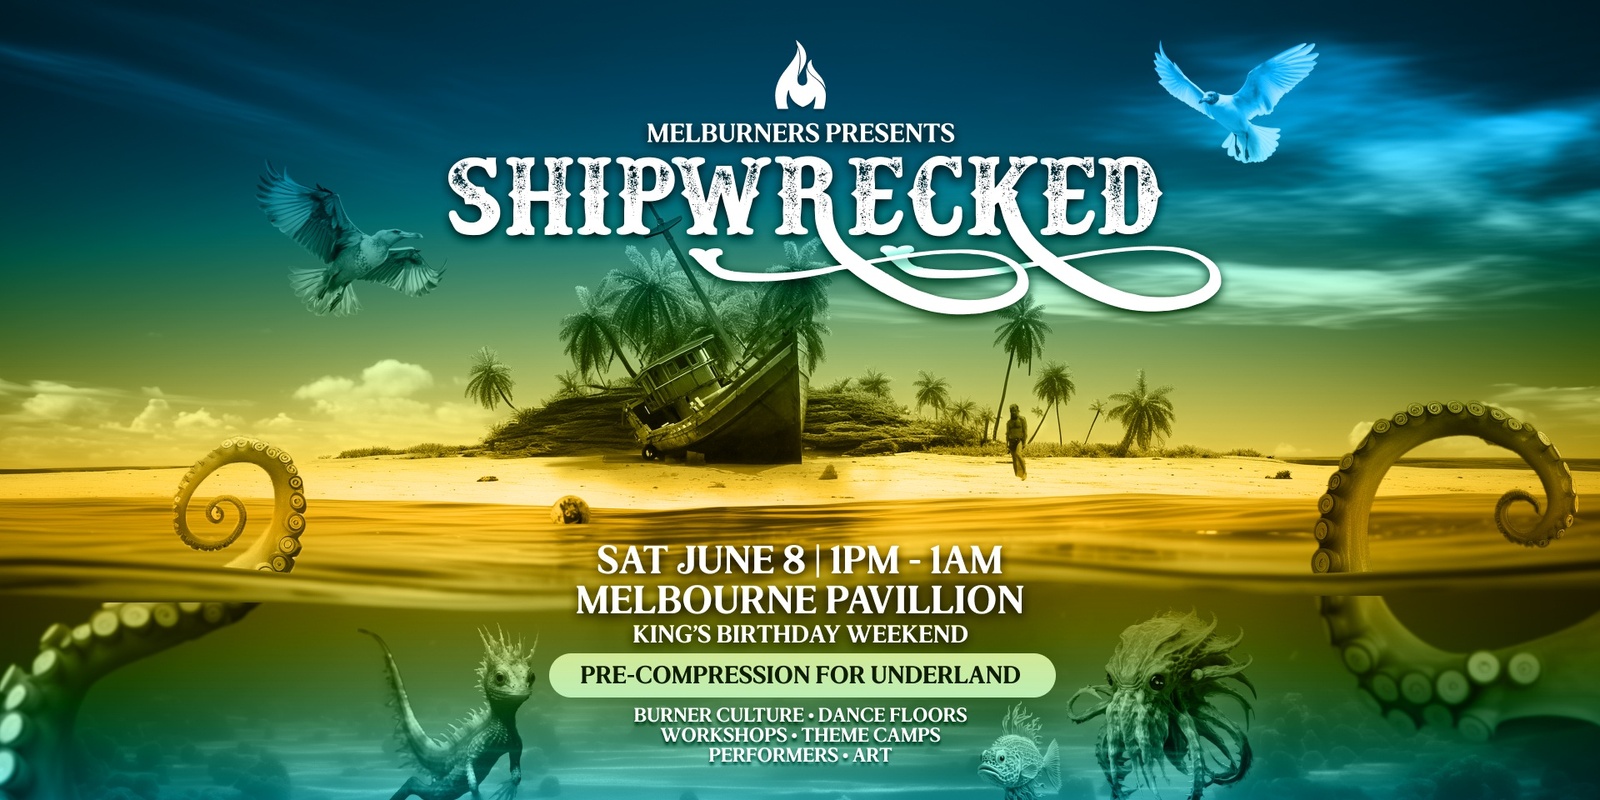 Banner image for Melburners presents: Shipwrecked, an Underland Pre-compression